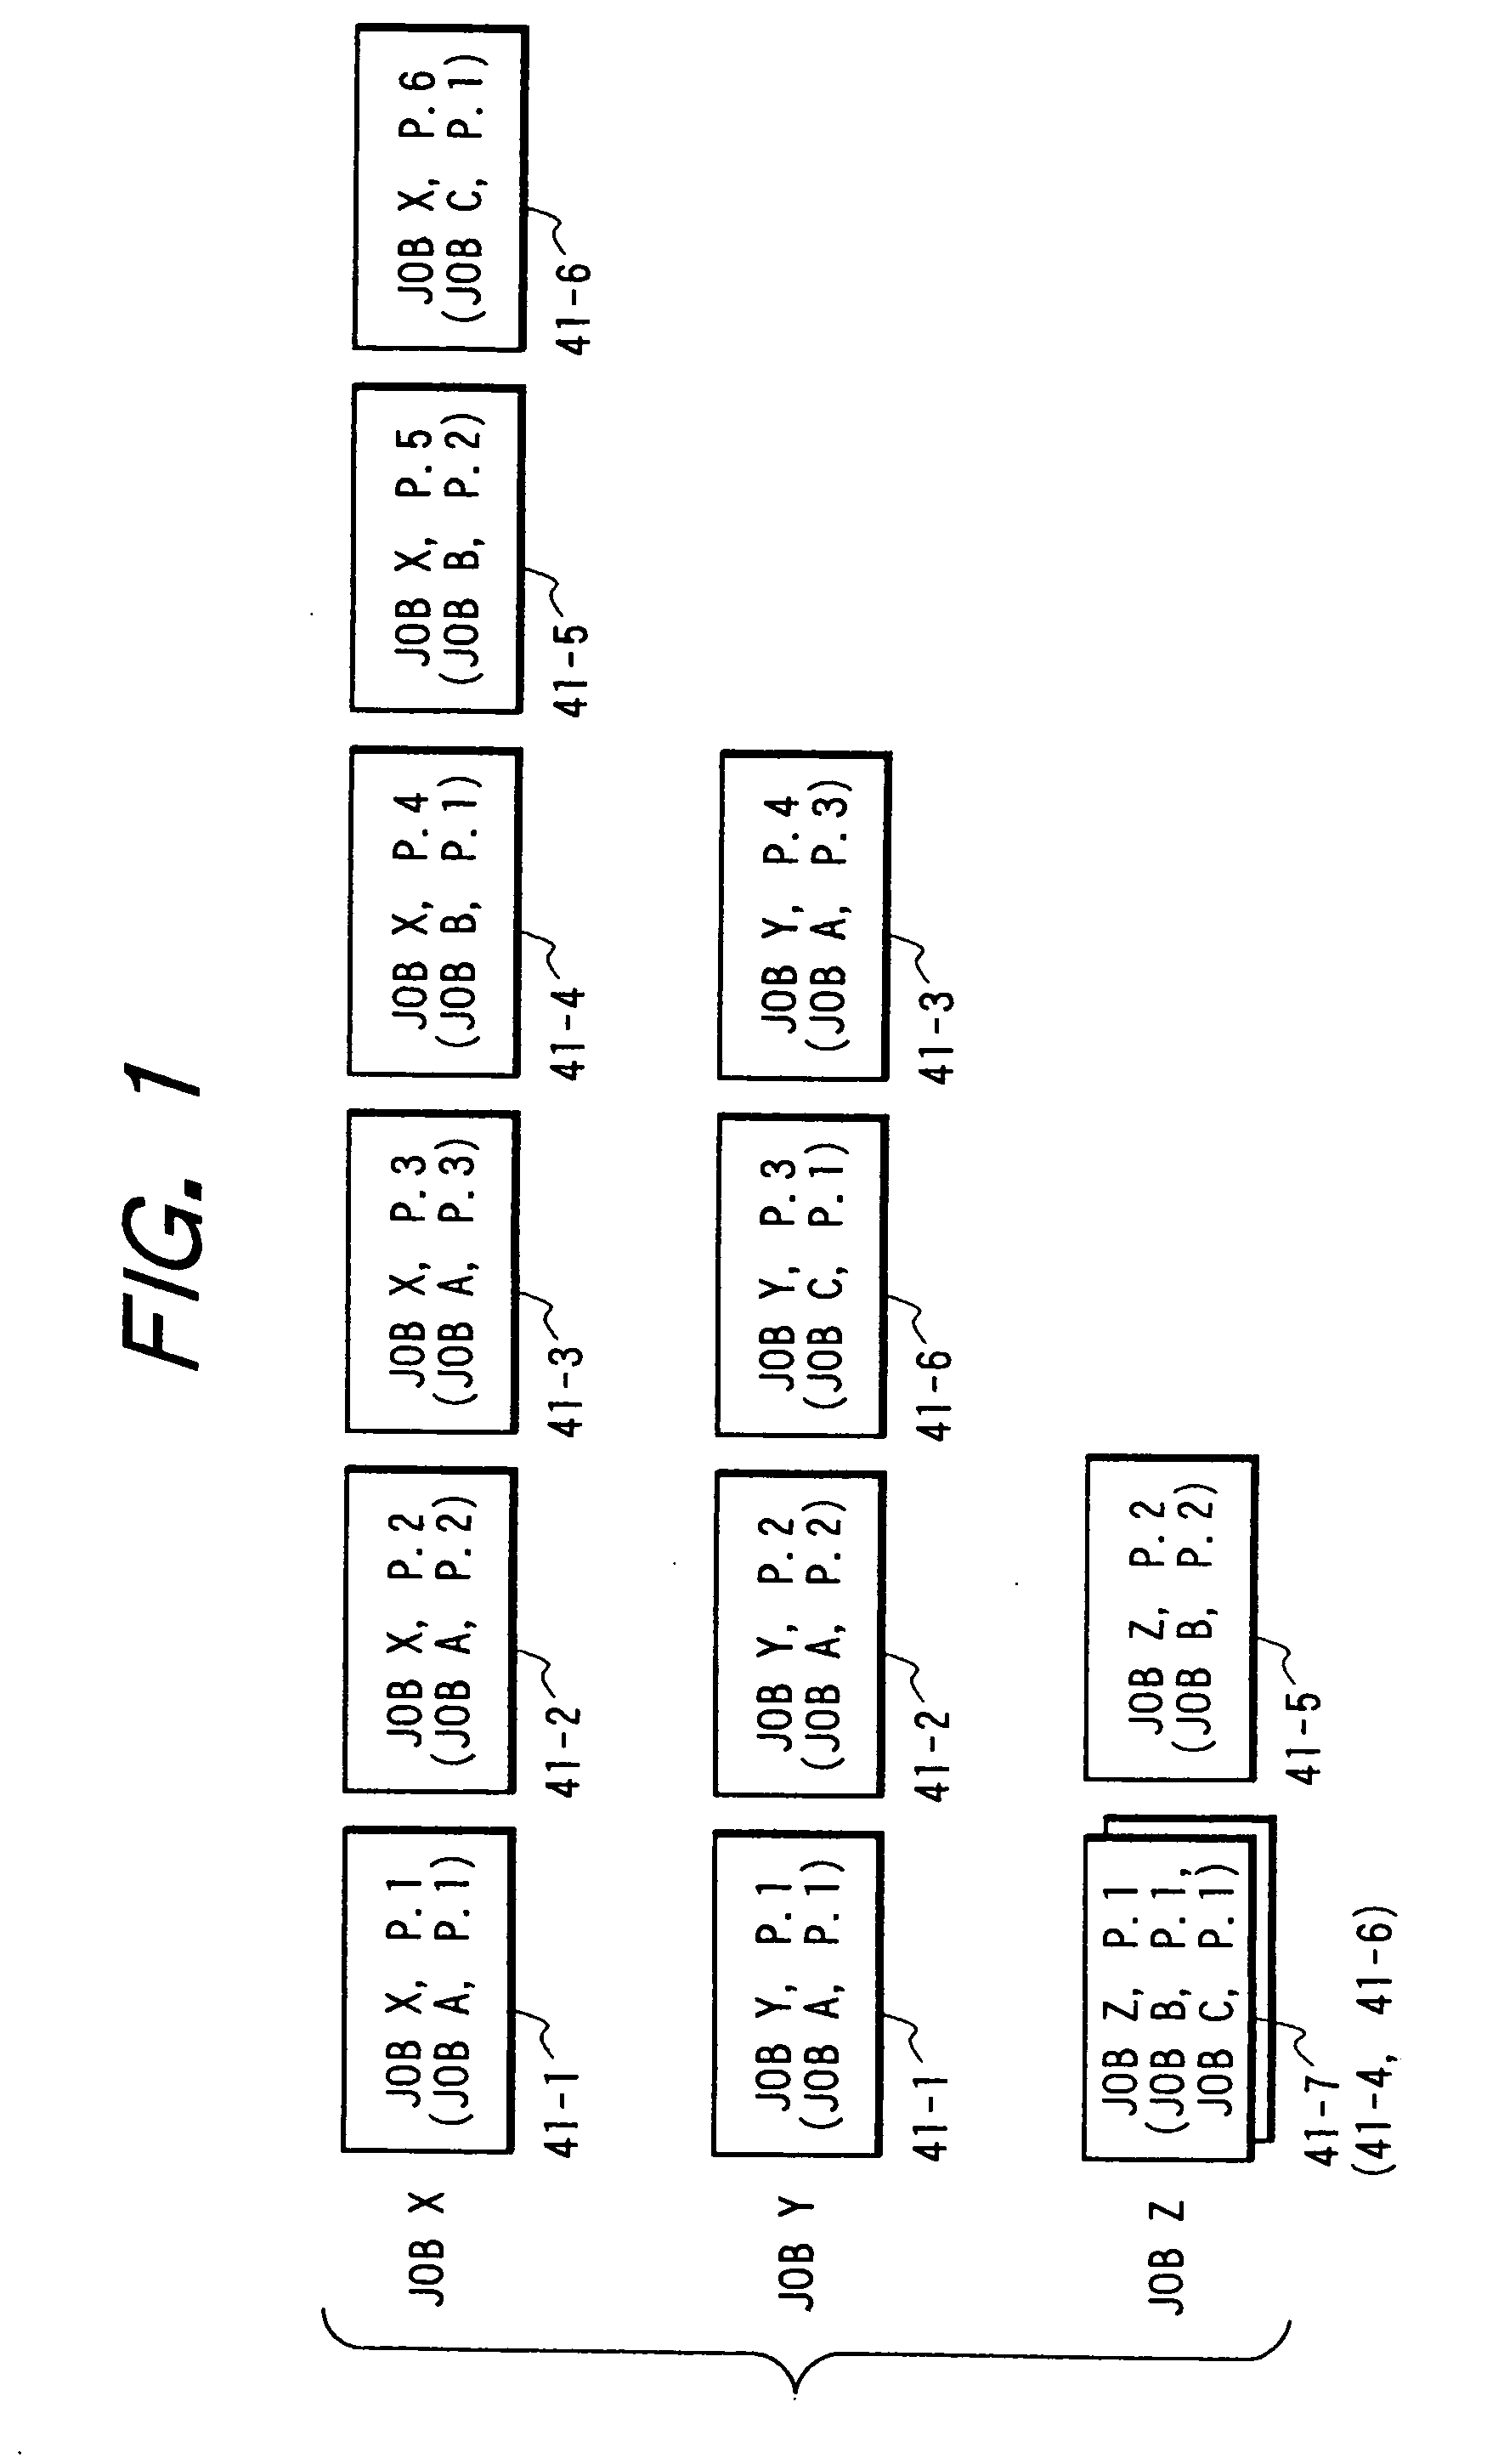 Apparatus for controlling image processing and a method for controlling image processing